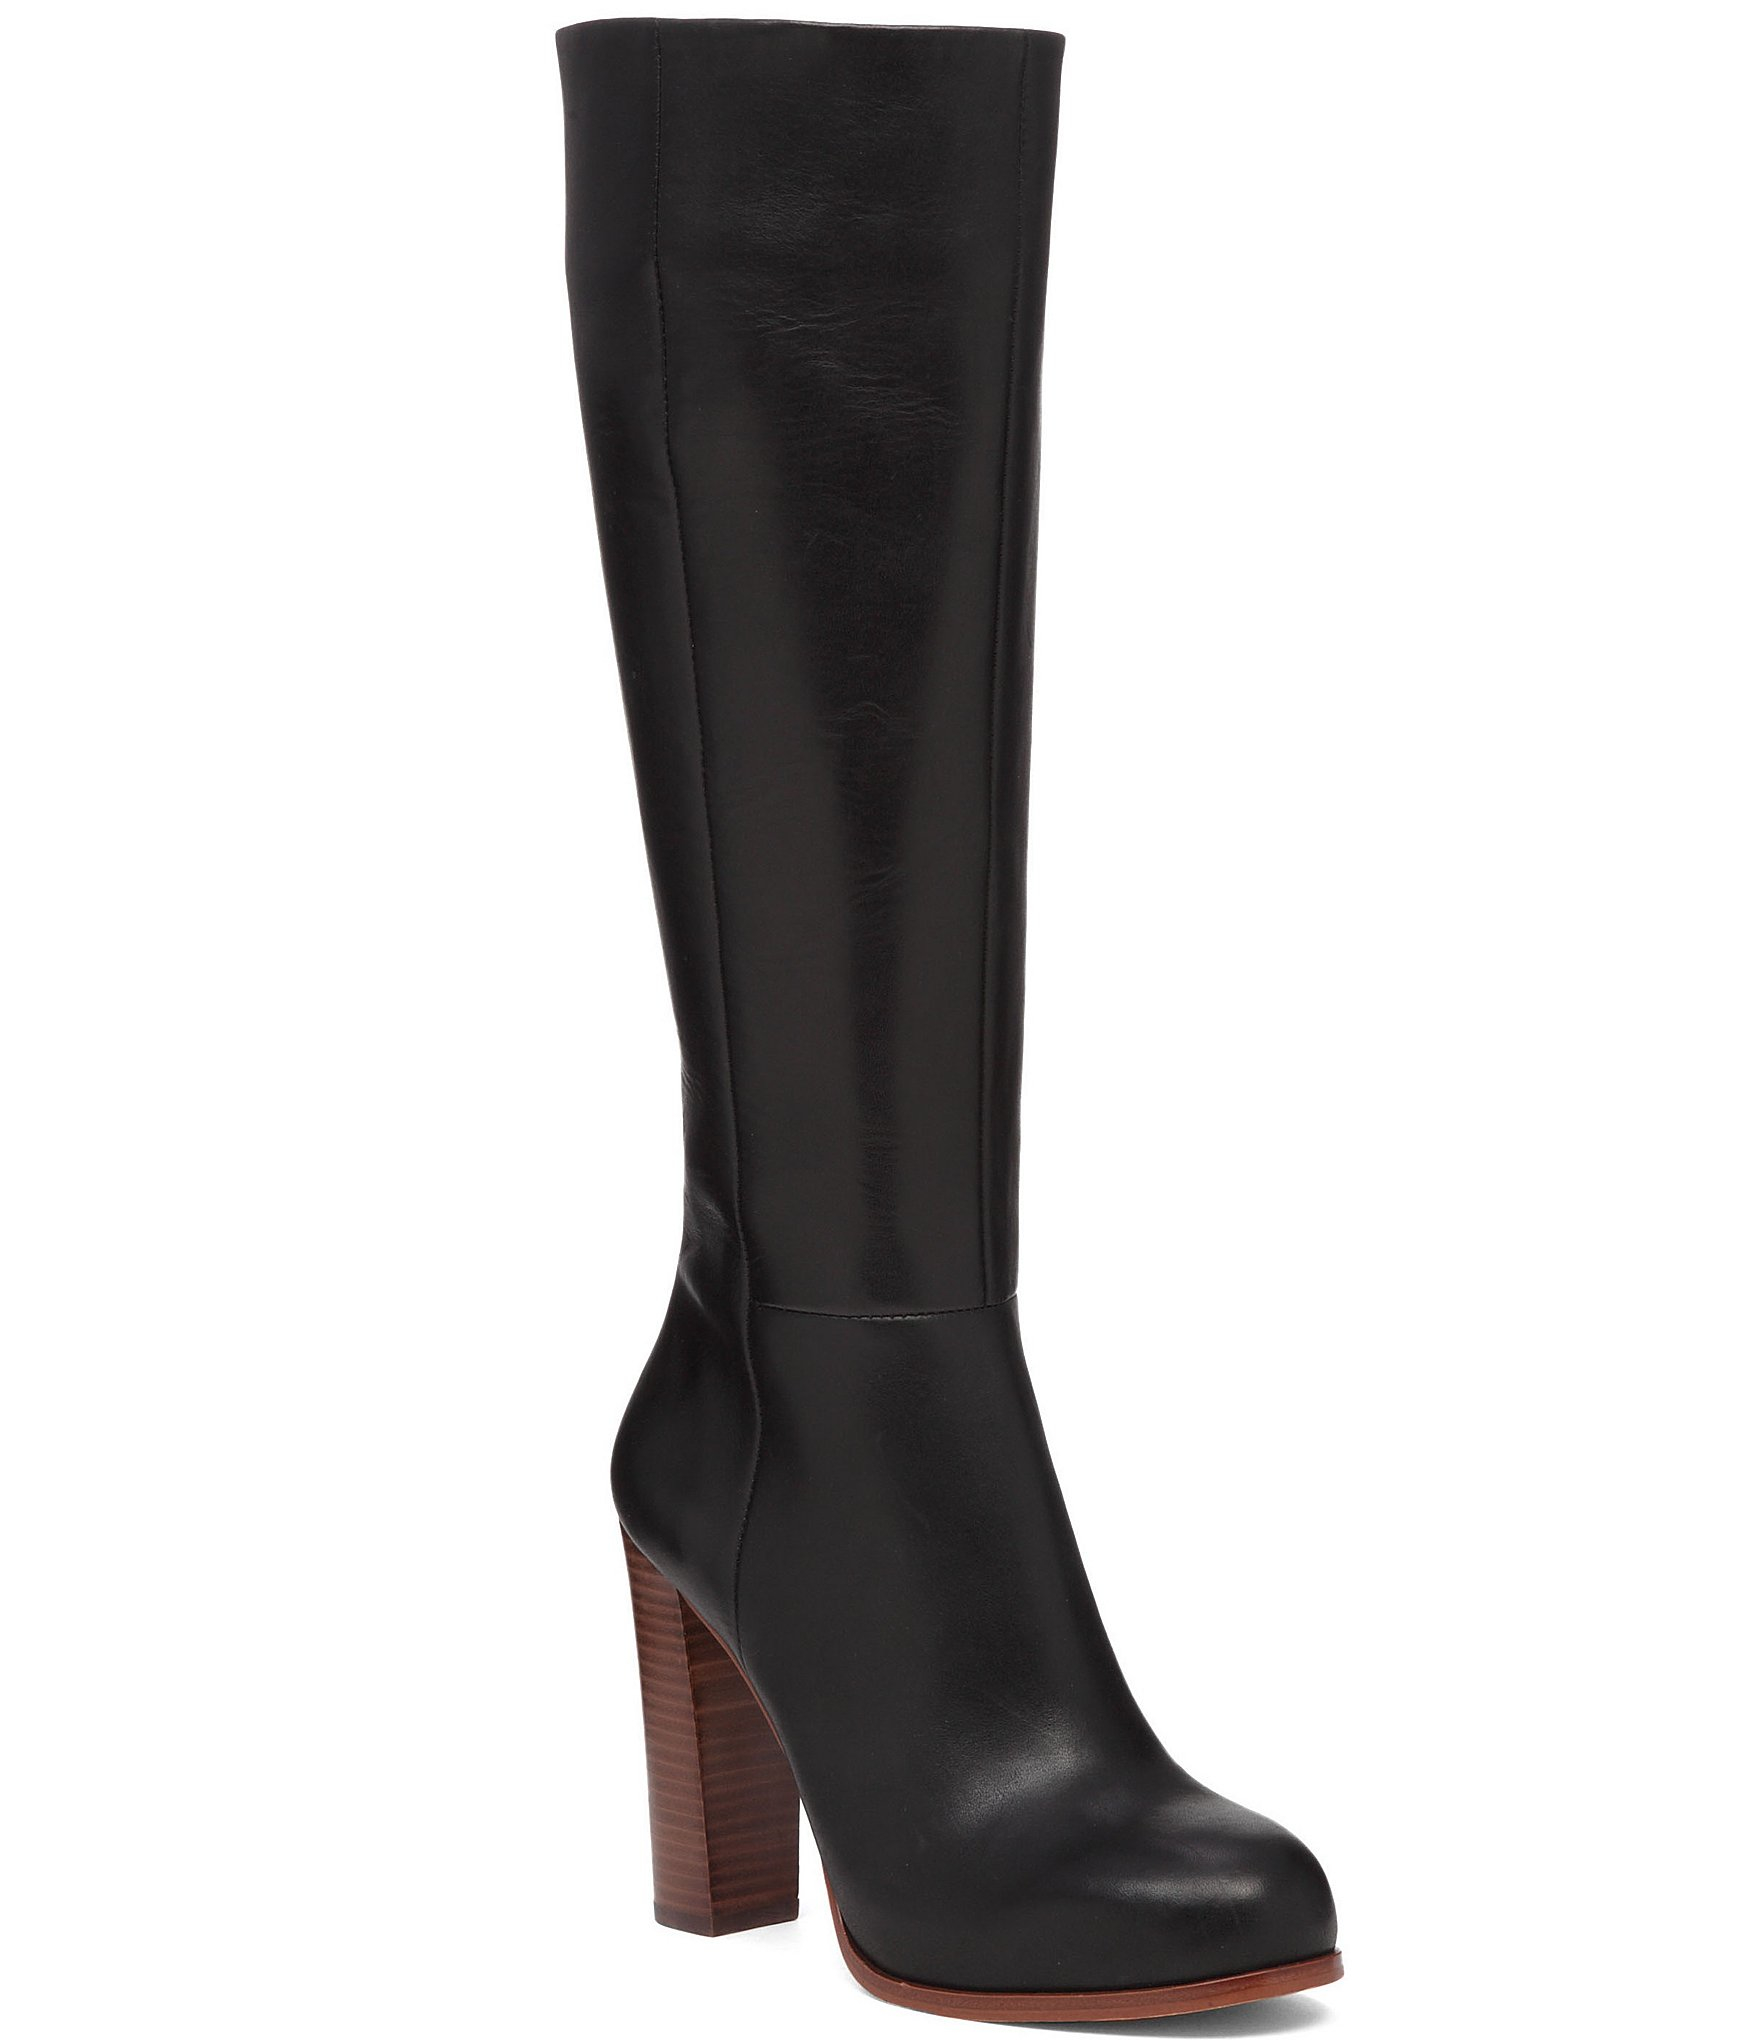 Vince camuto 'gretcha' Knee High Boot in Black | Lyst